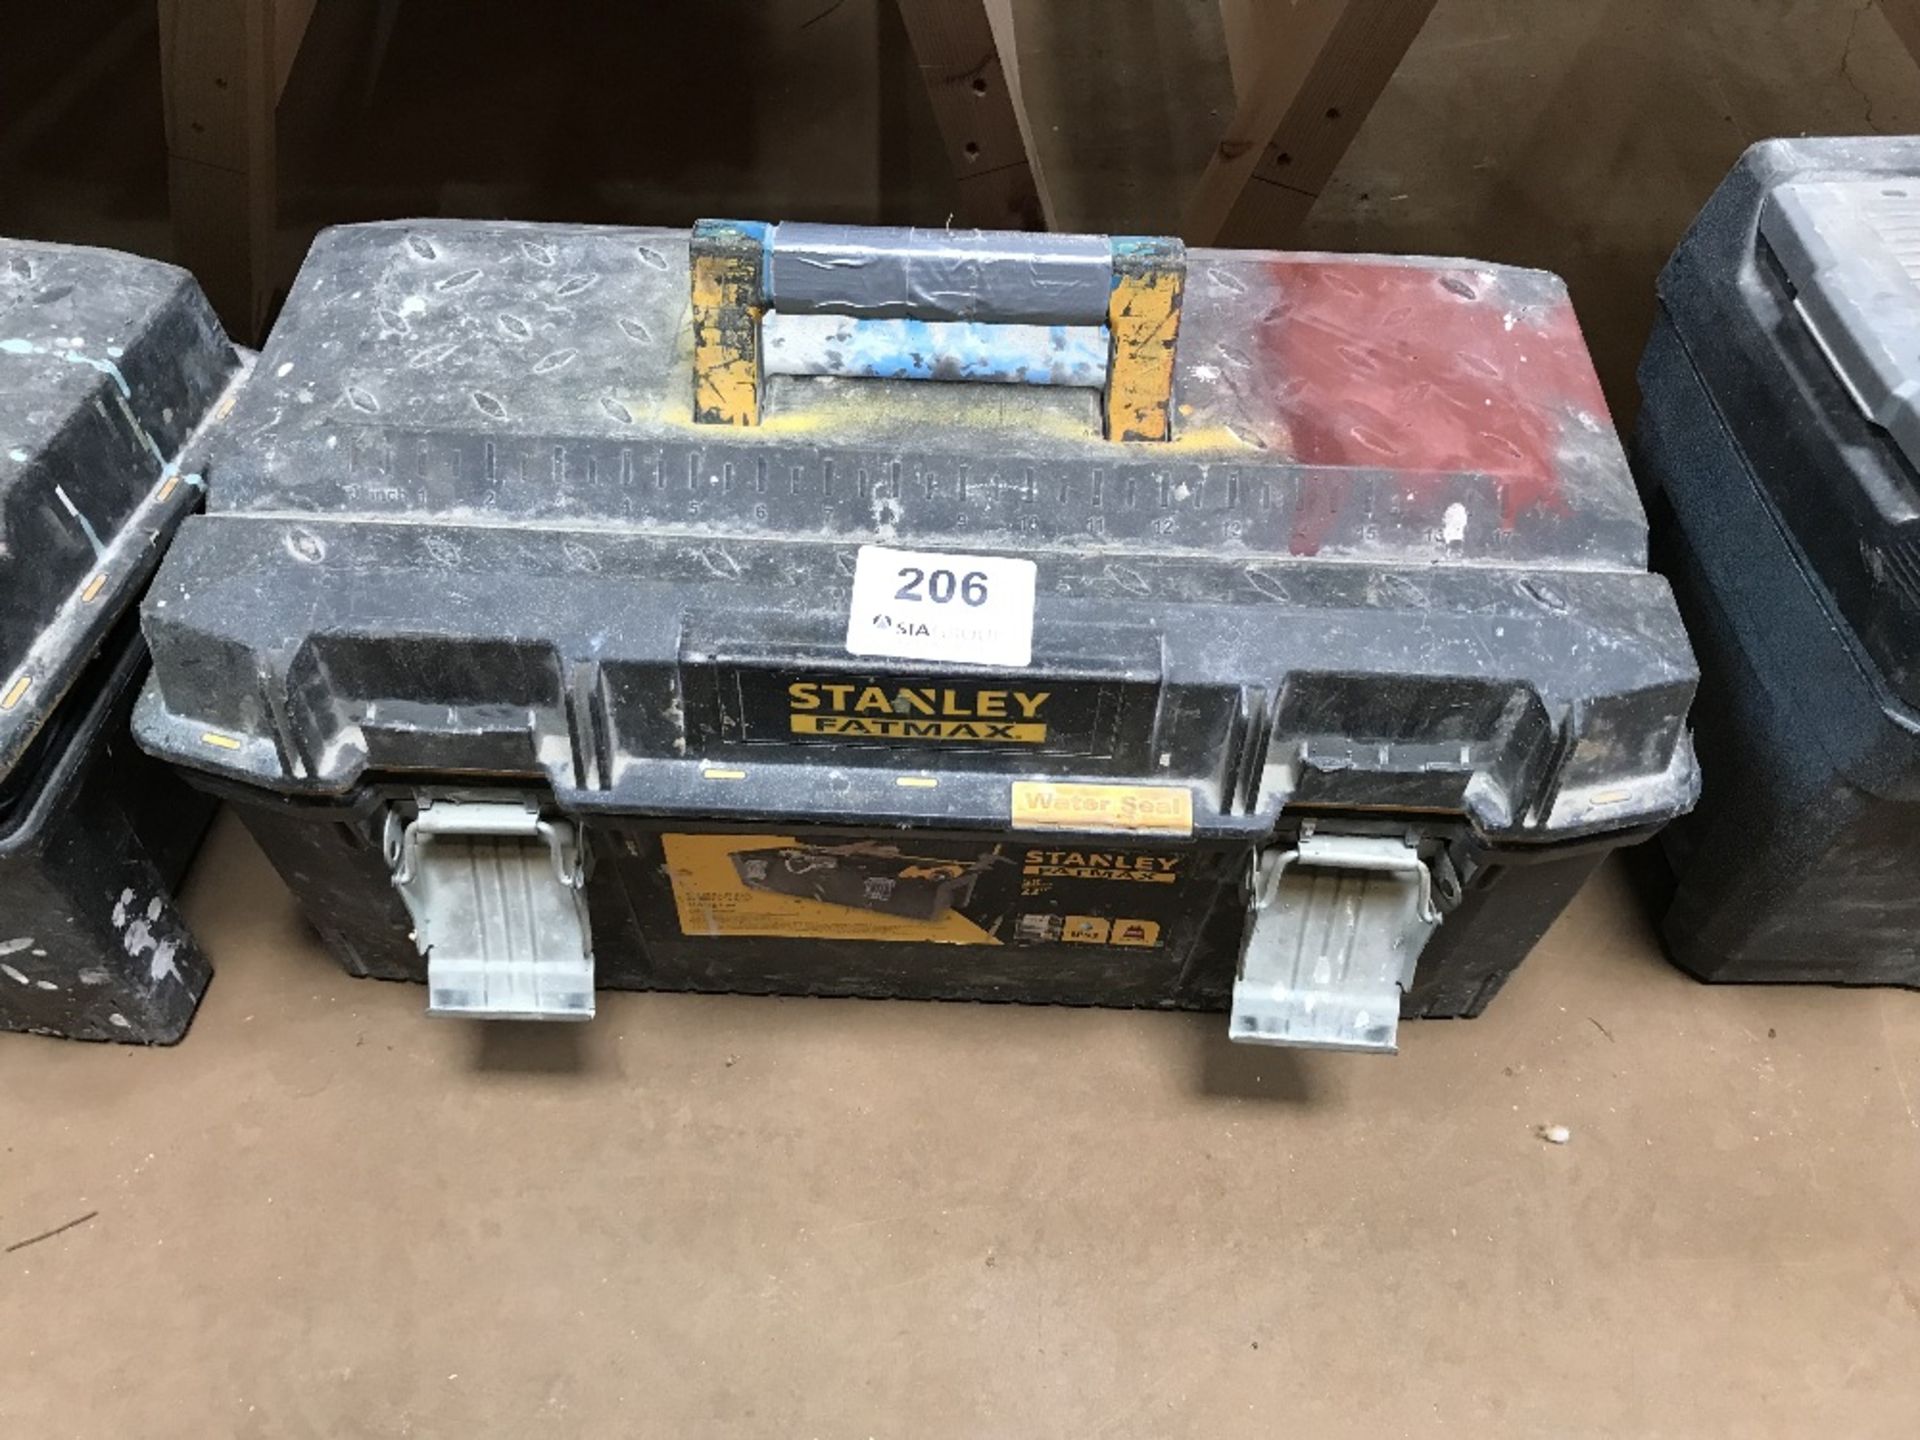 Stanley tool box with contents - Image 2 of 2